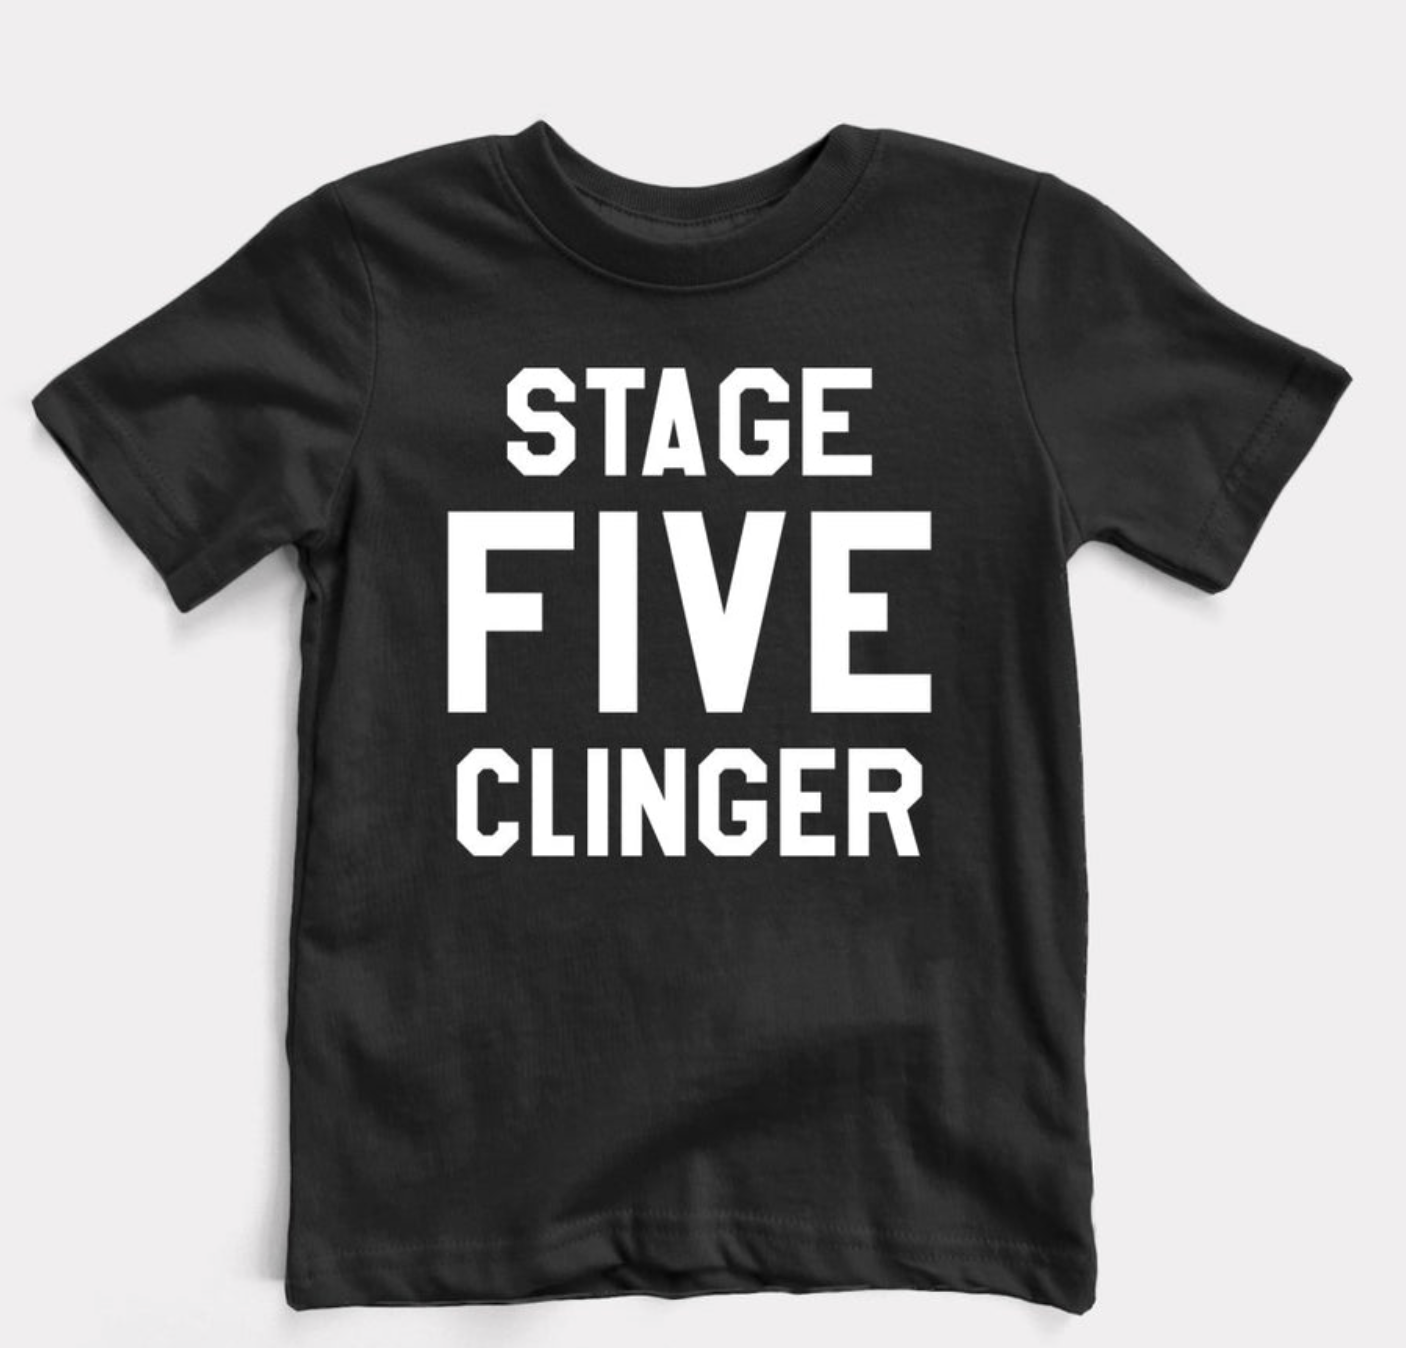 Stage Five Toddler: 6M